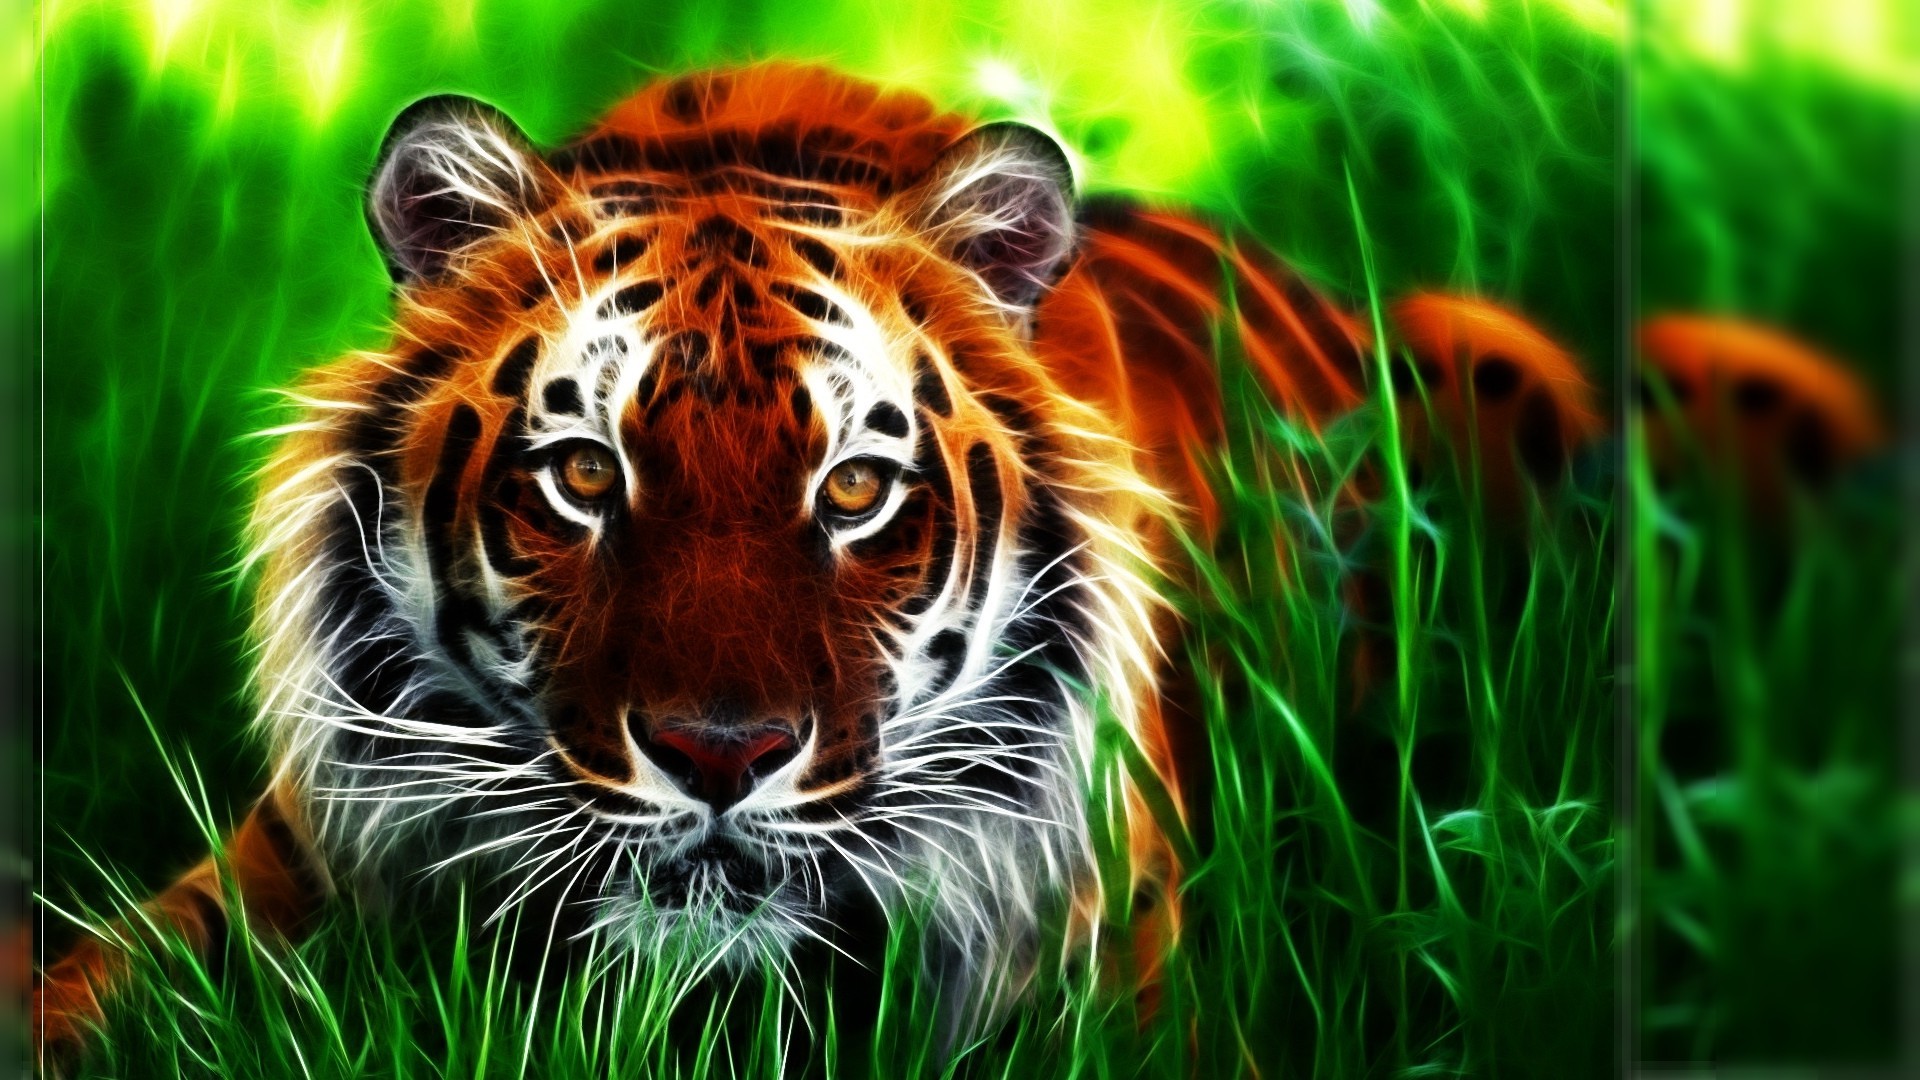 1920x1080 Amazing 3d hd wallpapers tiger On Image Wallpapers with 3d hd wallpapers  tiger Download HD Wallpaper